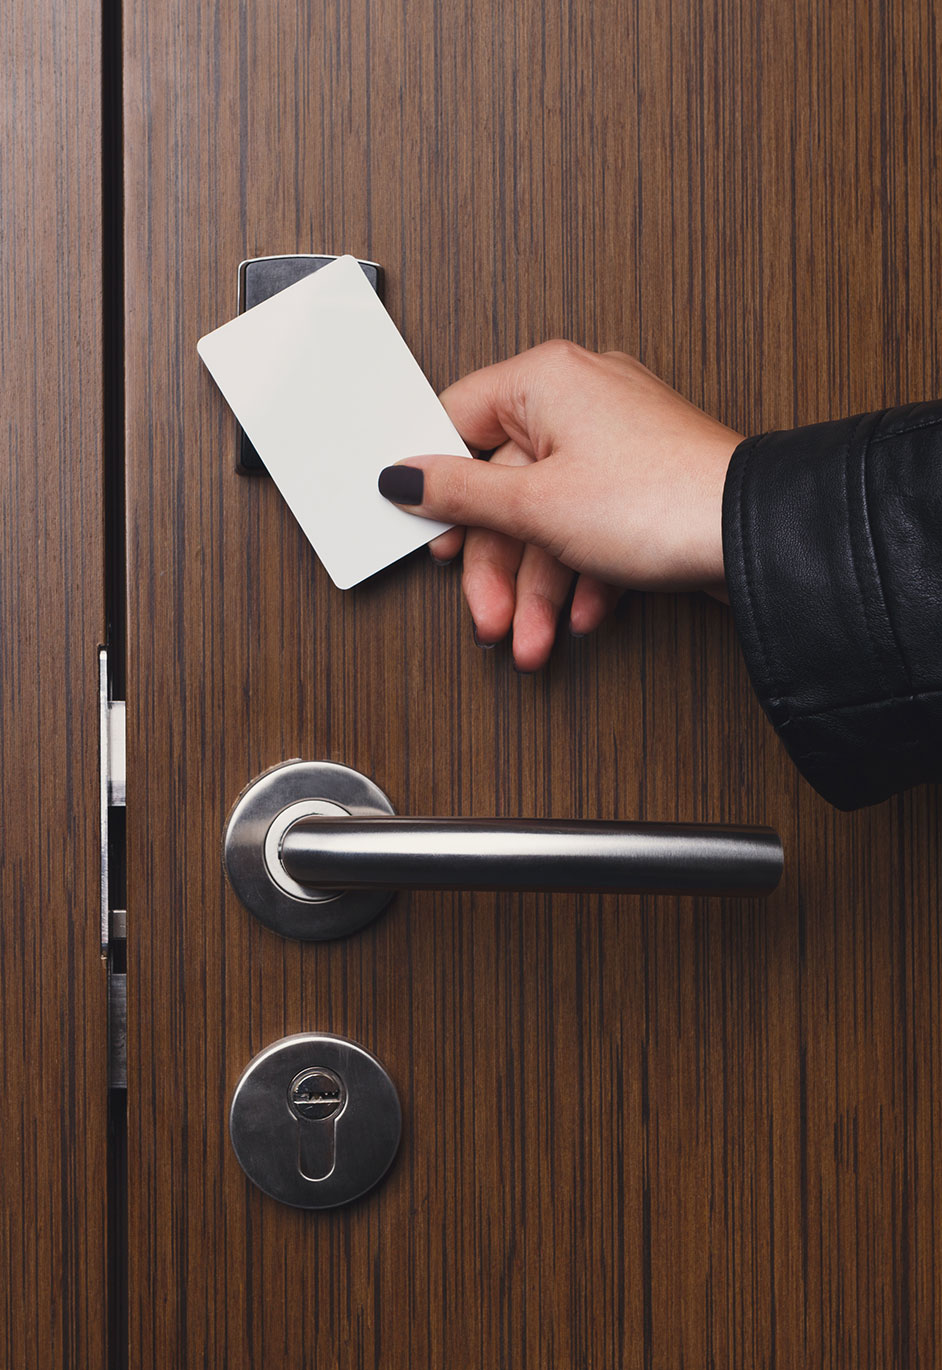 Key Card Access to Secure Commercial Entryway